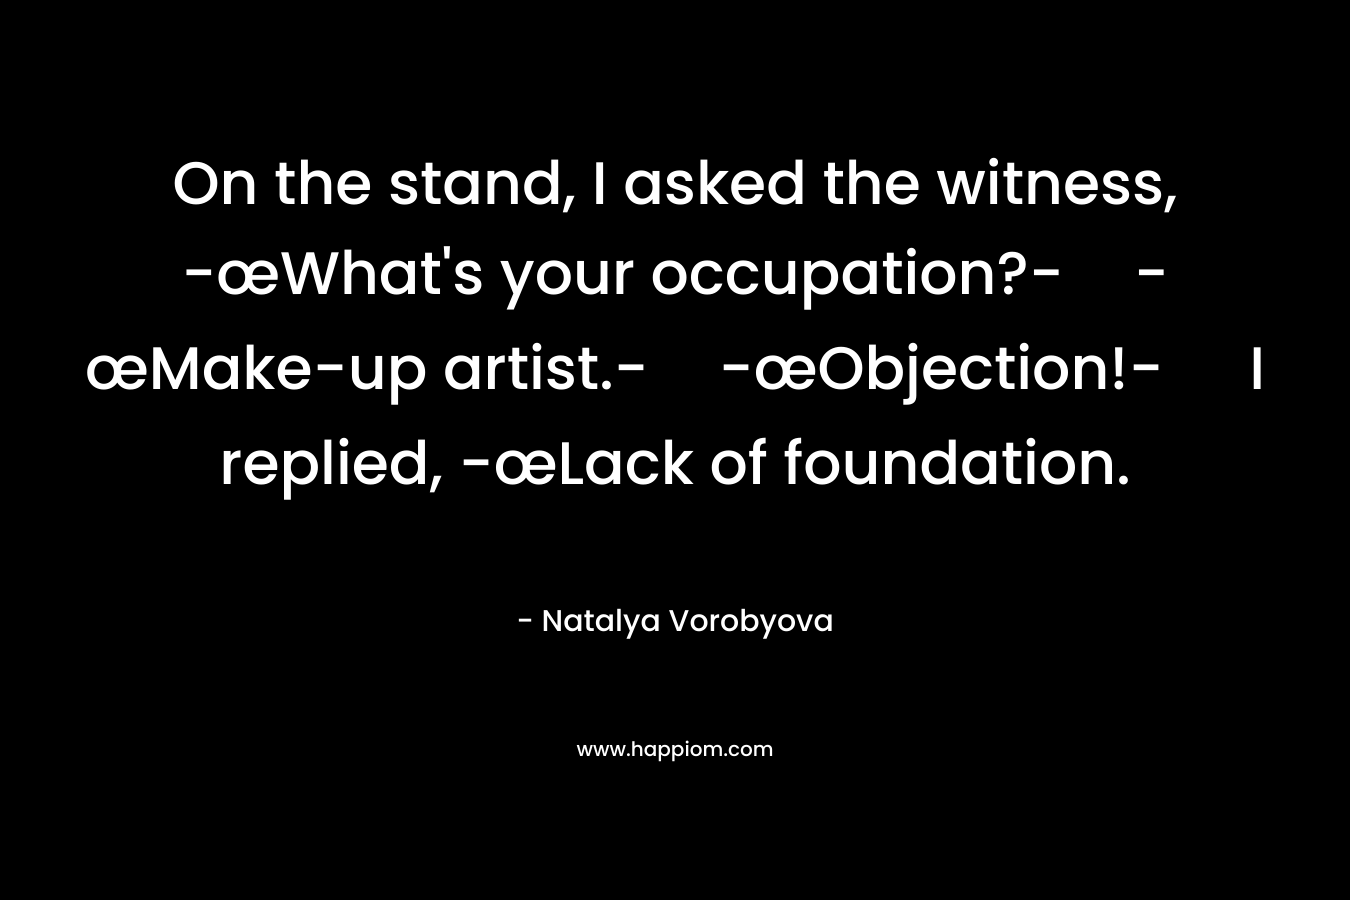 On the stand, I asked the witness, -œWhat’s your occupation?--œMake-up artist.--œObjection!- I replied, -œLack of foundation. – Natalya Vorobyova